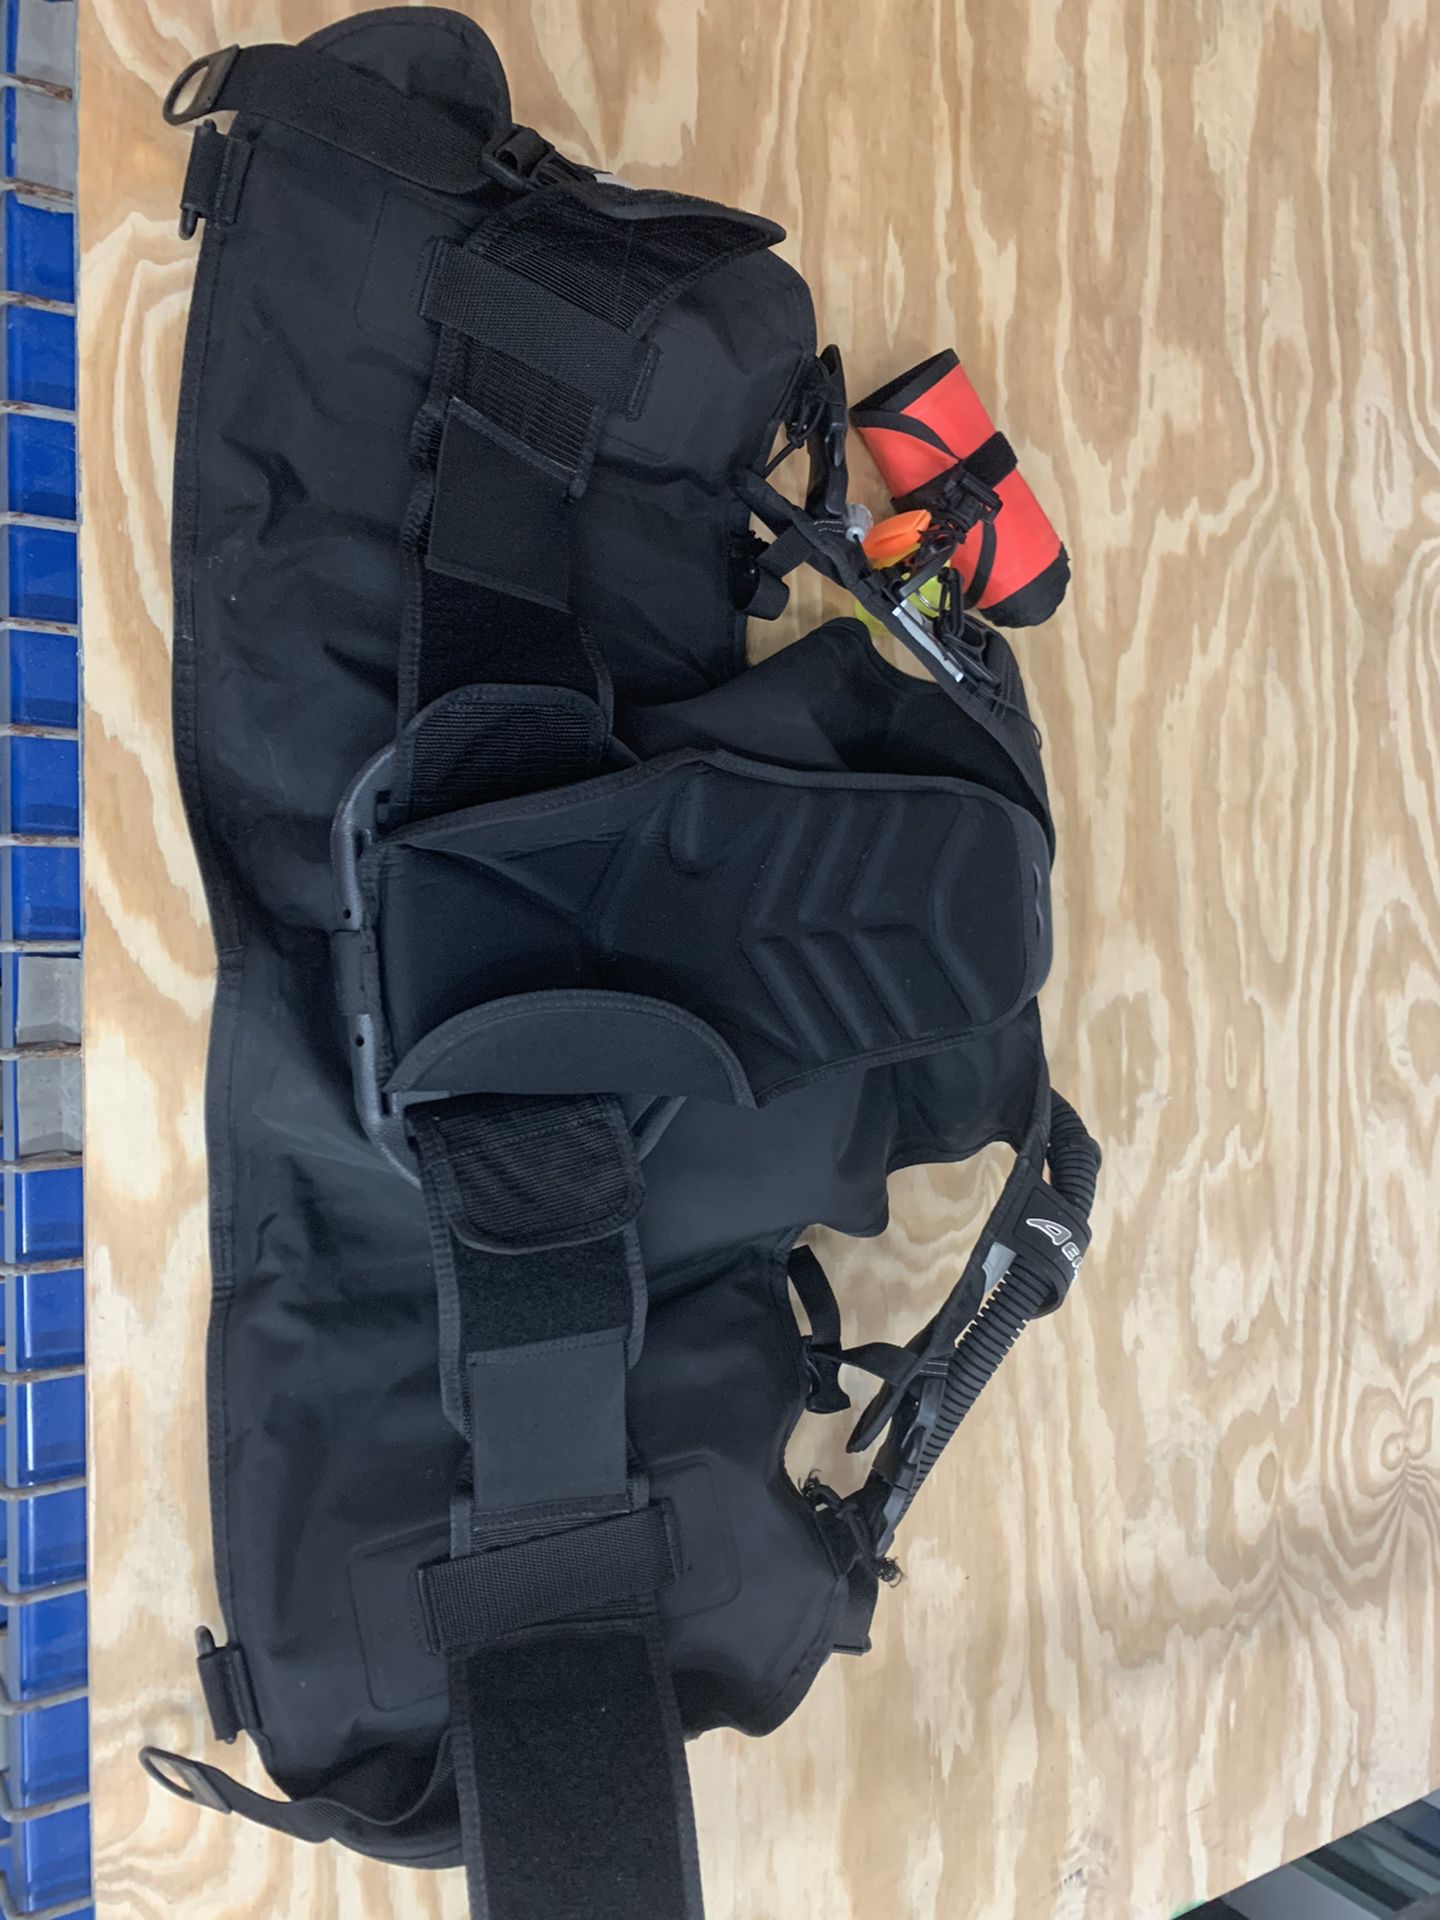 Scuba gear bcd size small - aeris ex100 for Sale in North Lauderdale ...